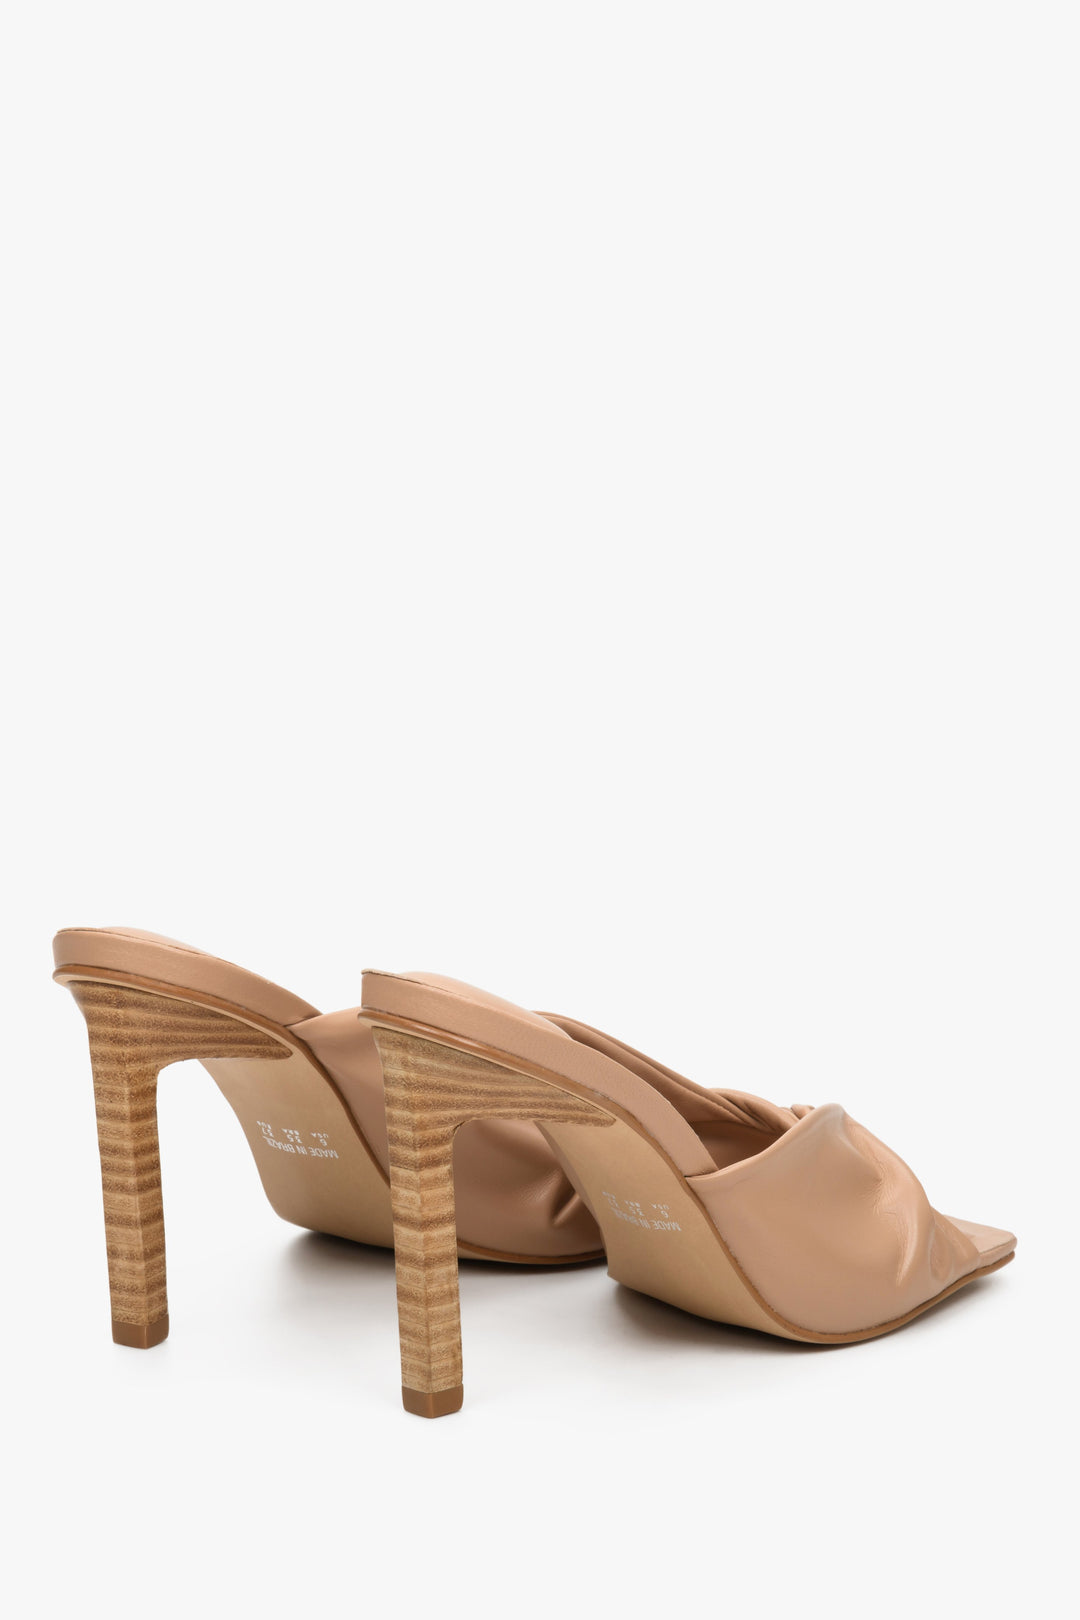 Women's beige leather high heel mules by Estro - close-up on the back of the shoes and the heel.